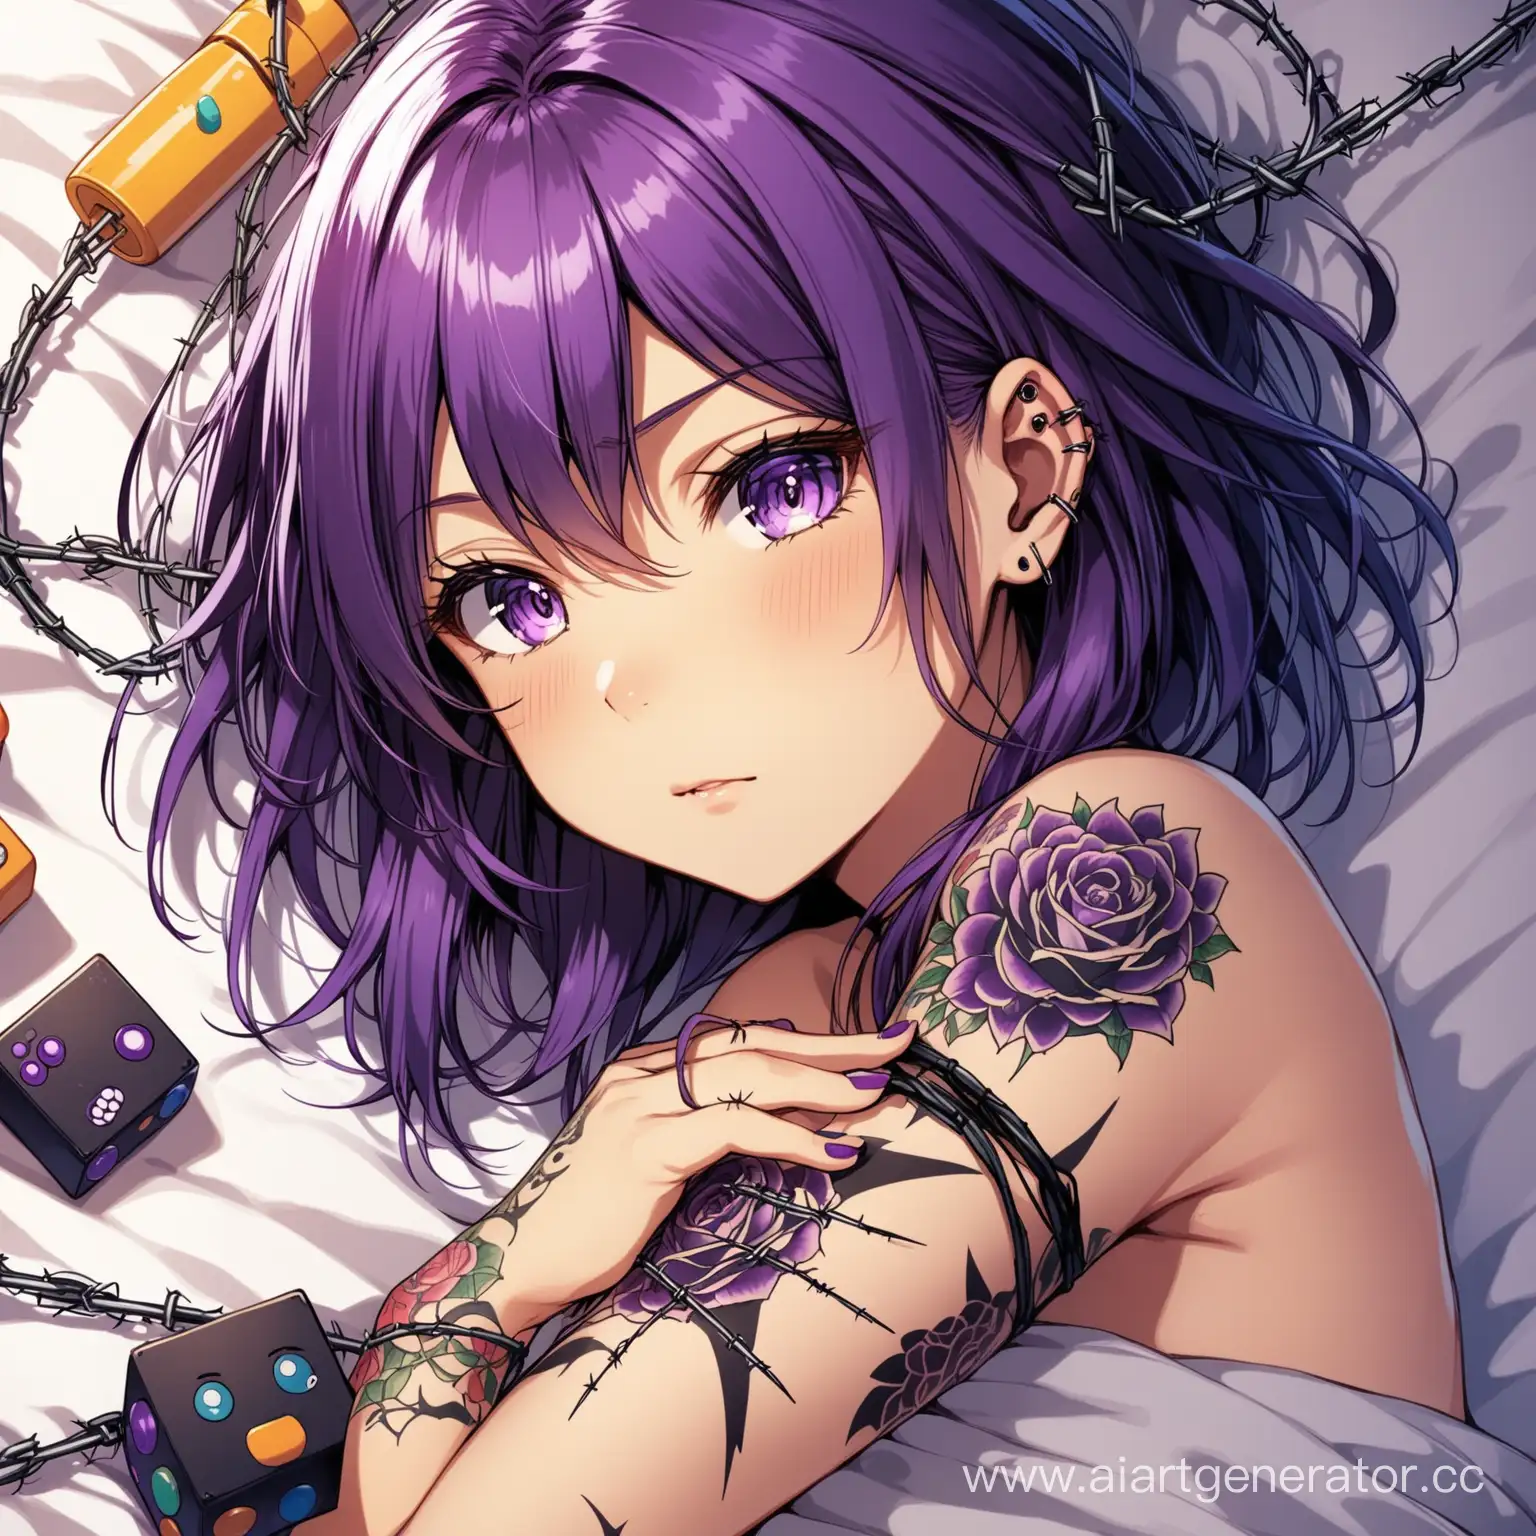 Anime-Girl-with-Unique-Hair-and-Tattoo-Relaxing-with-Toys